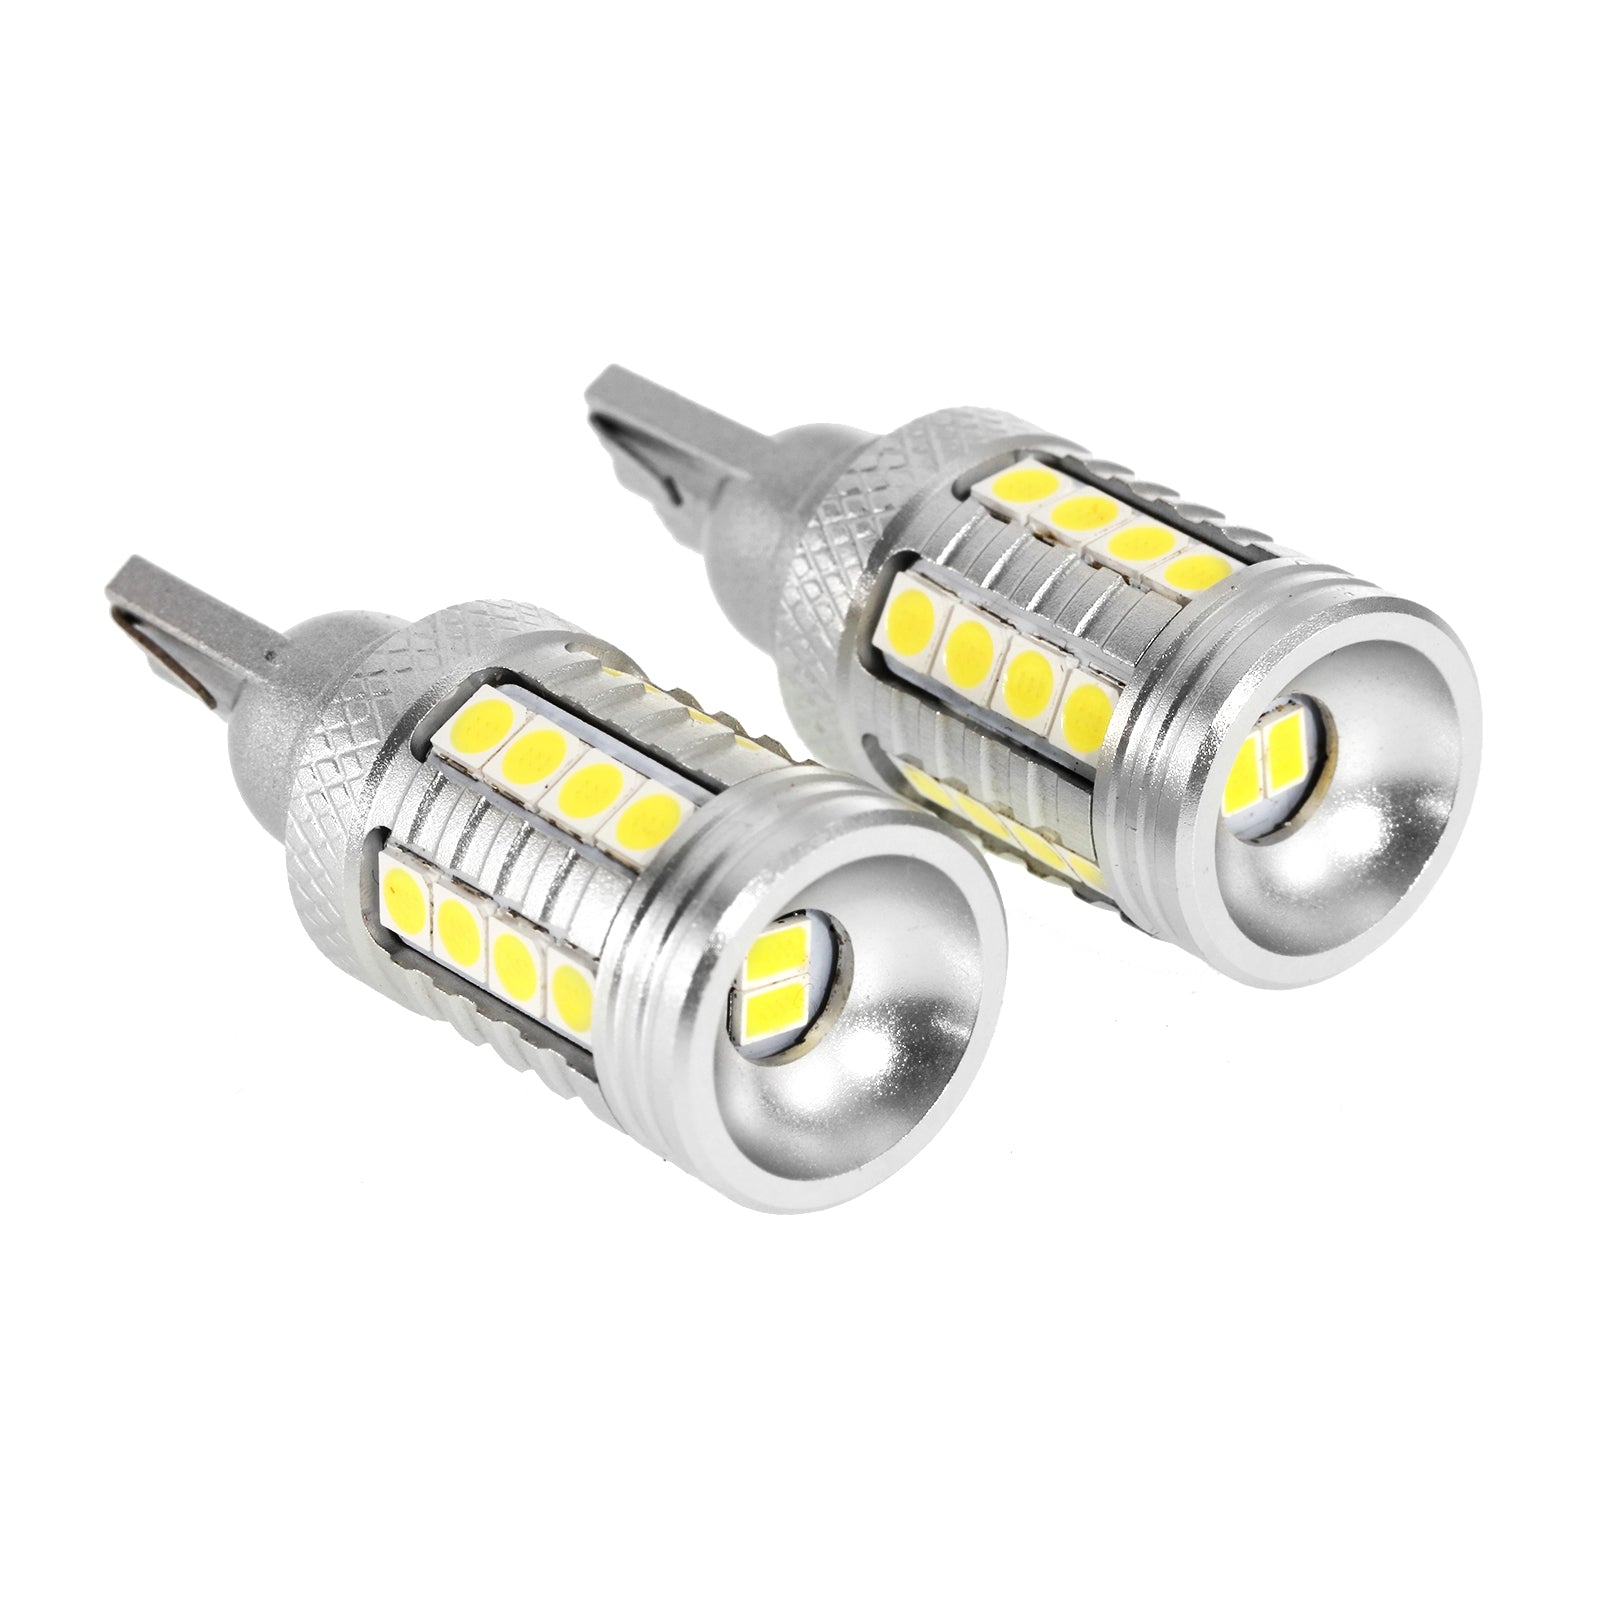 2× T15 W16W 921 912 Canbus No Error LED Bulbs 3080 SMD Backup